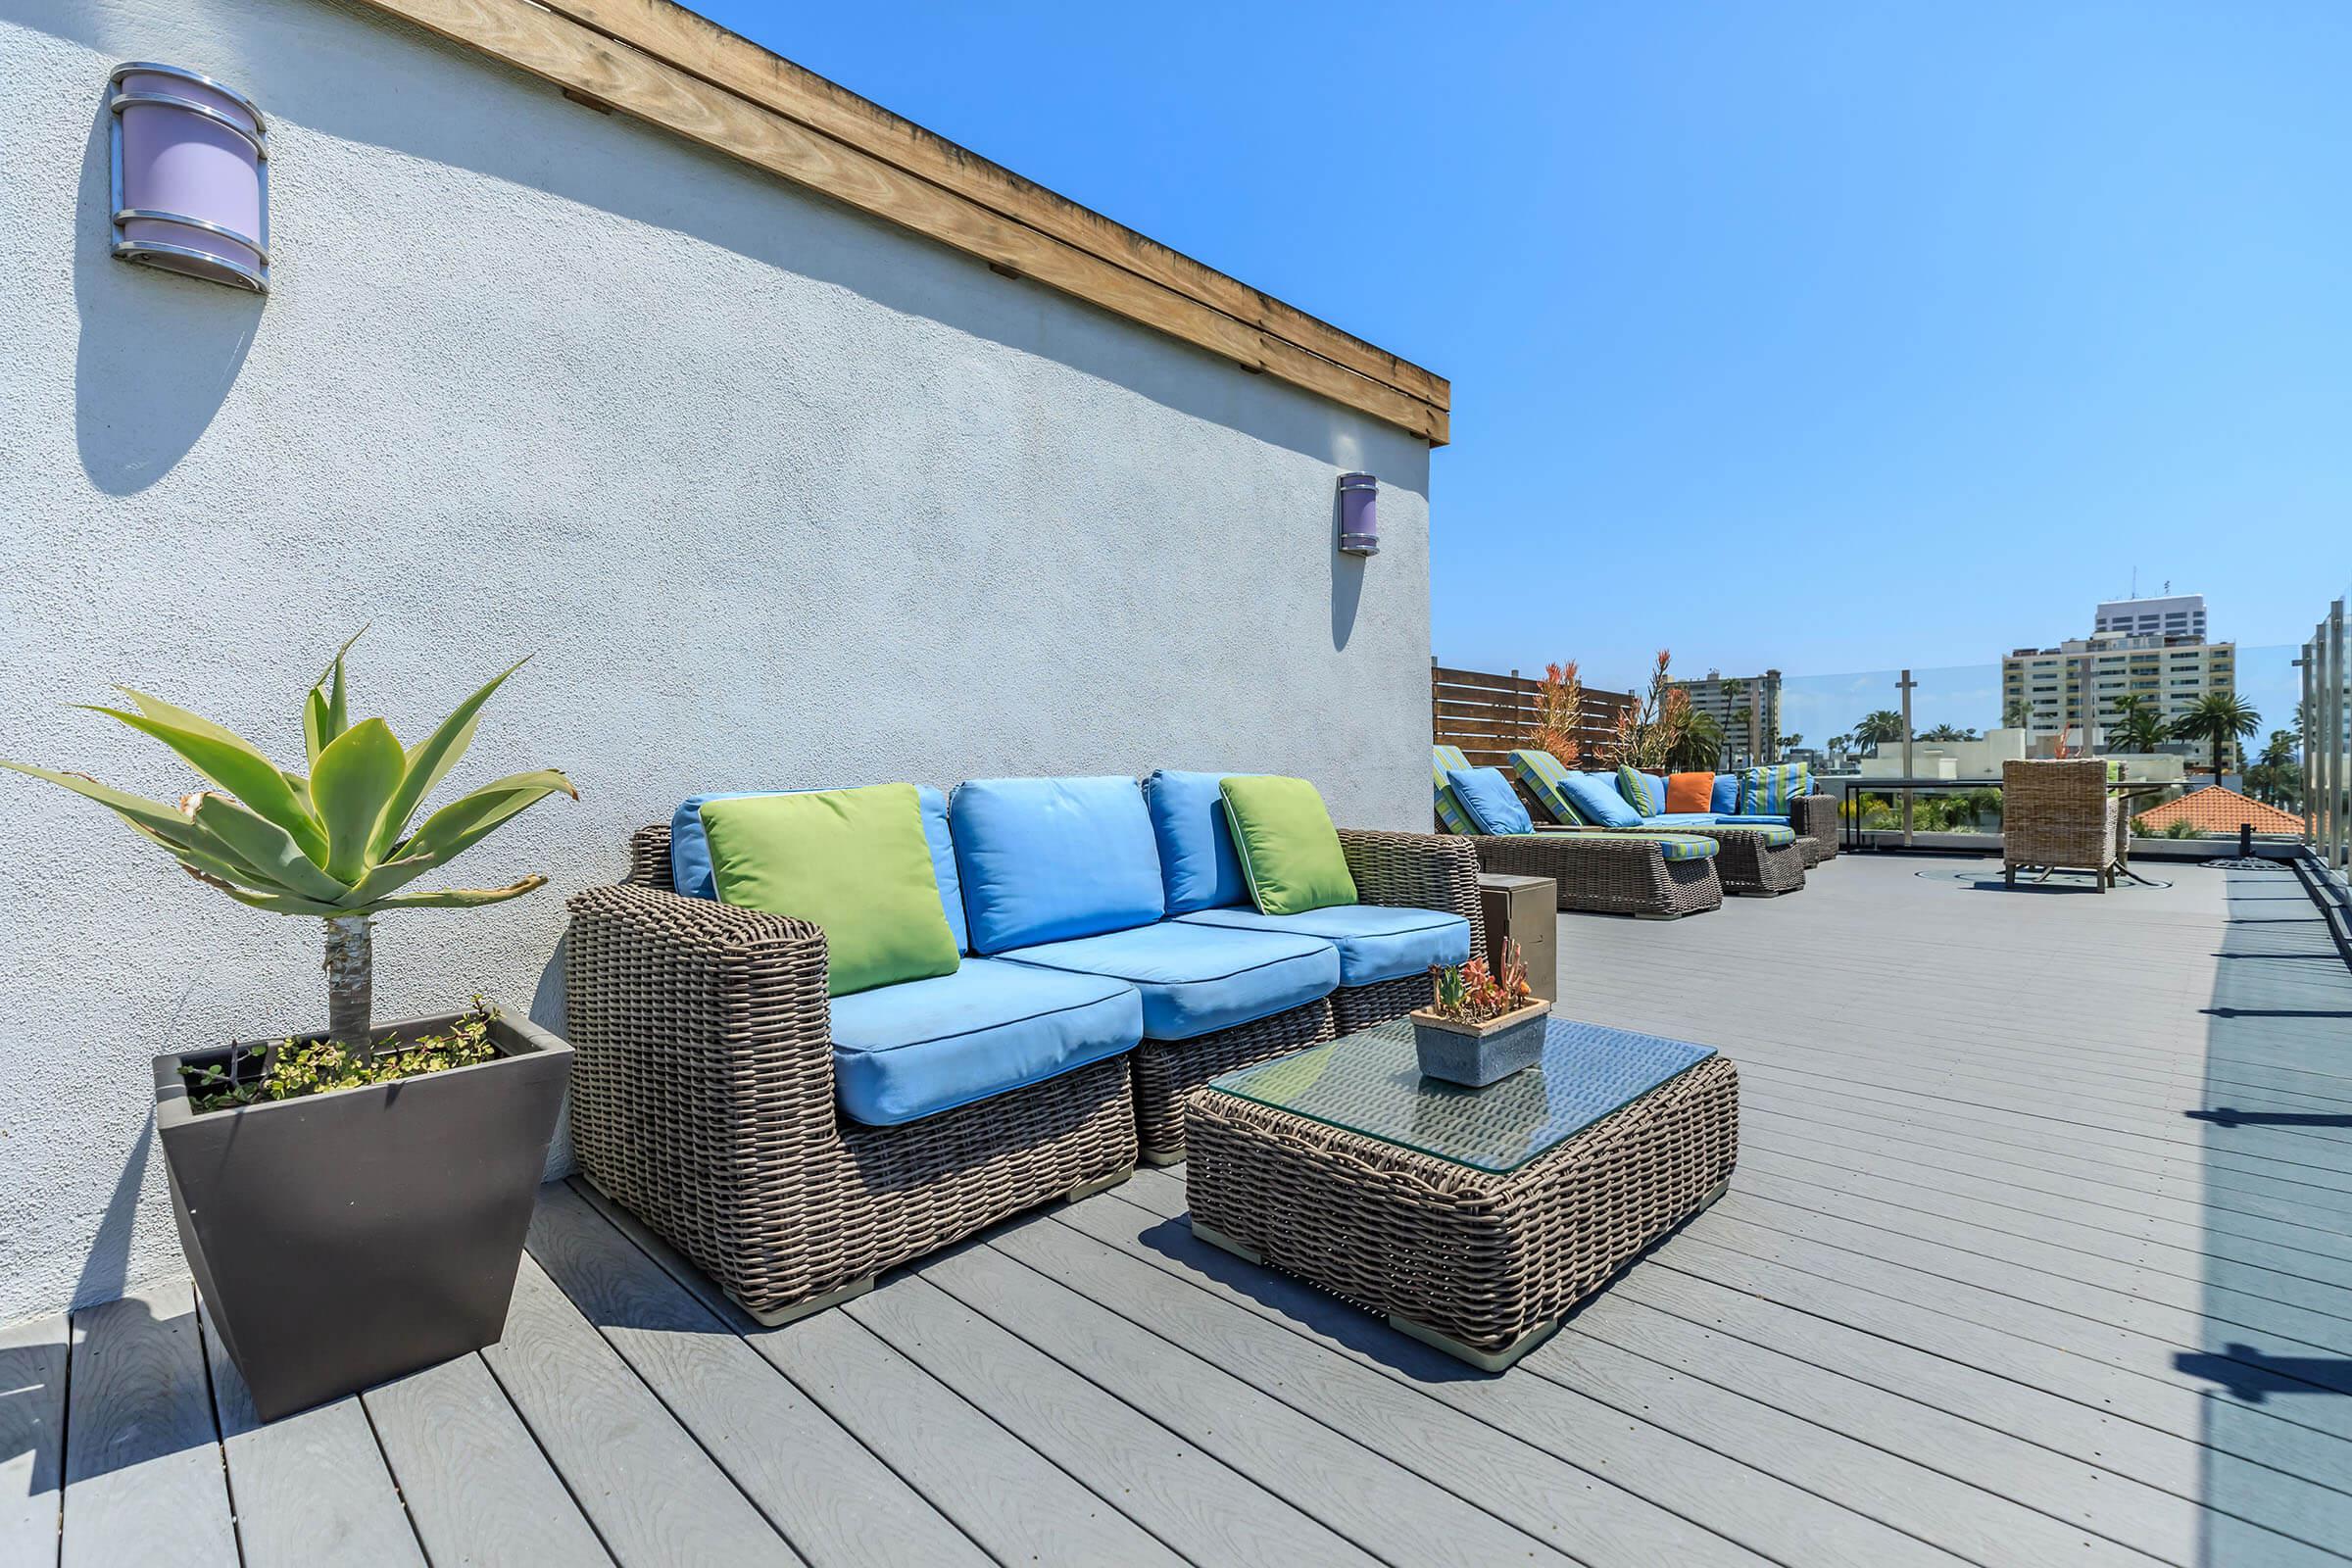 Wicker couches on rooftop